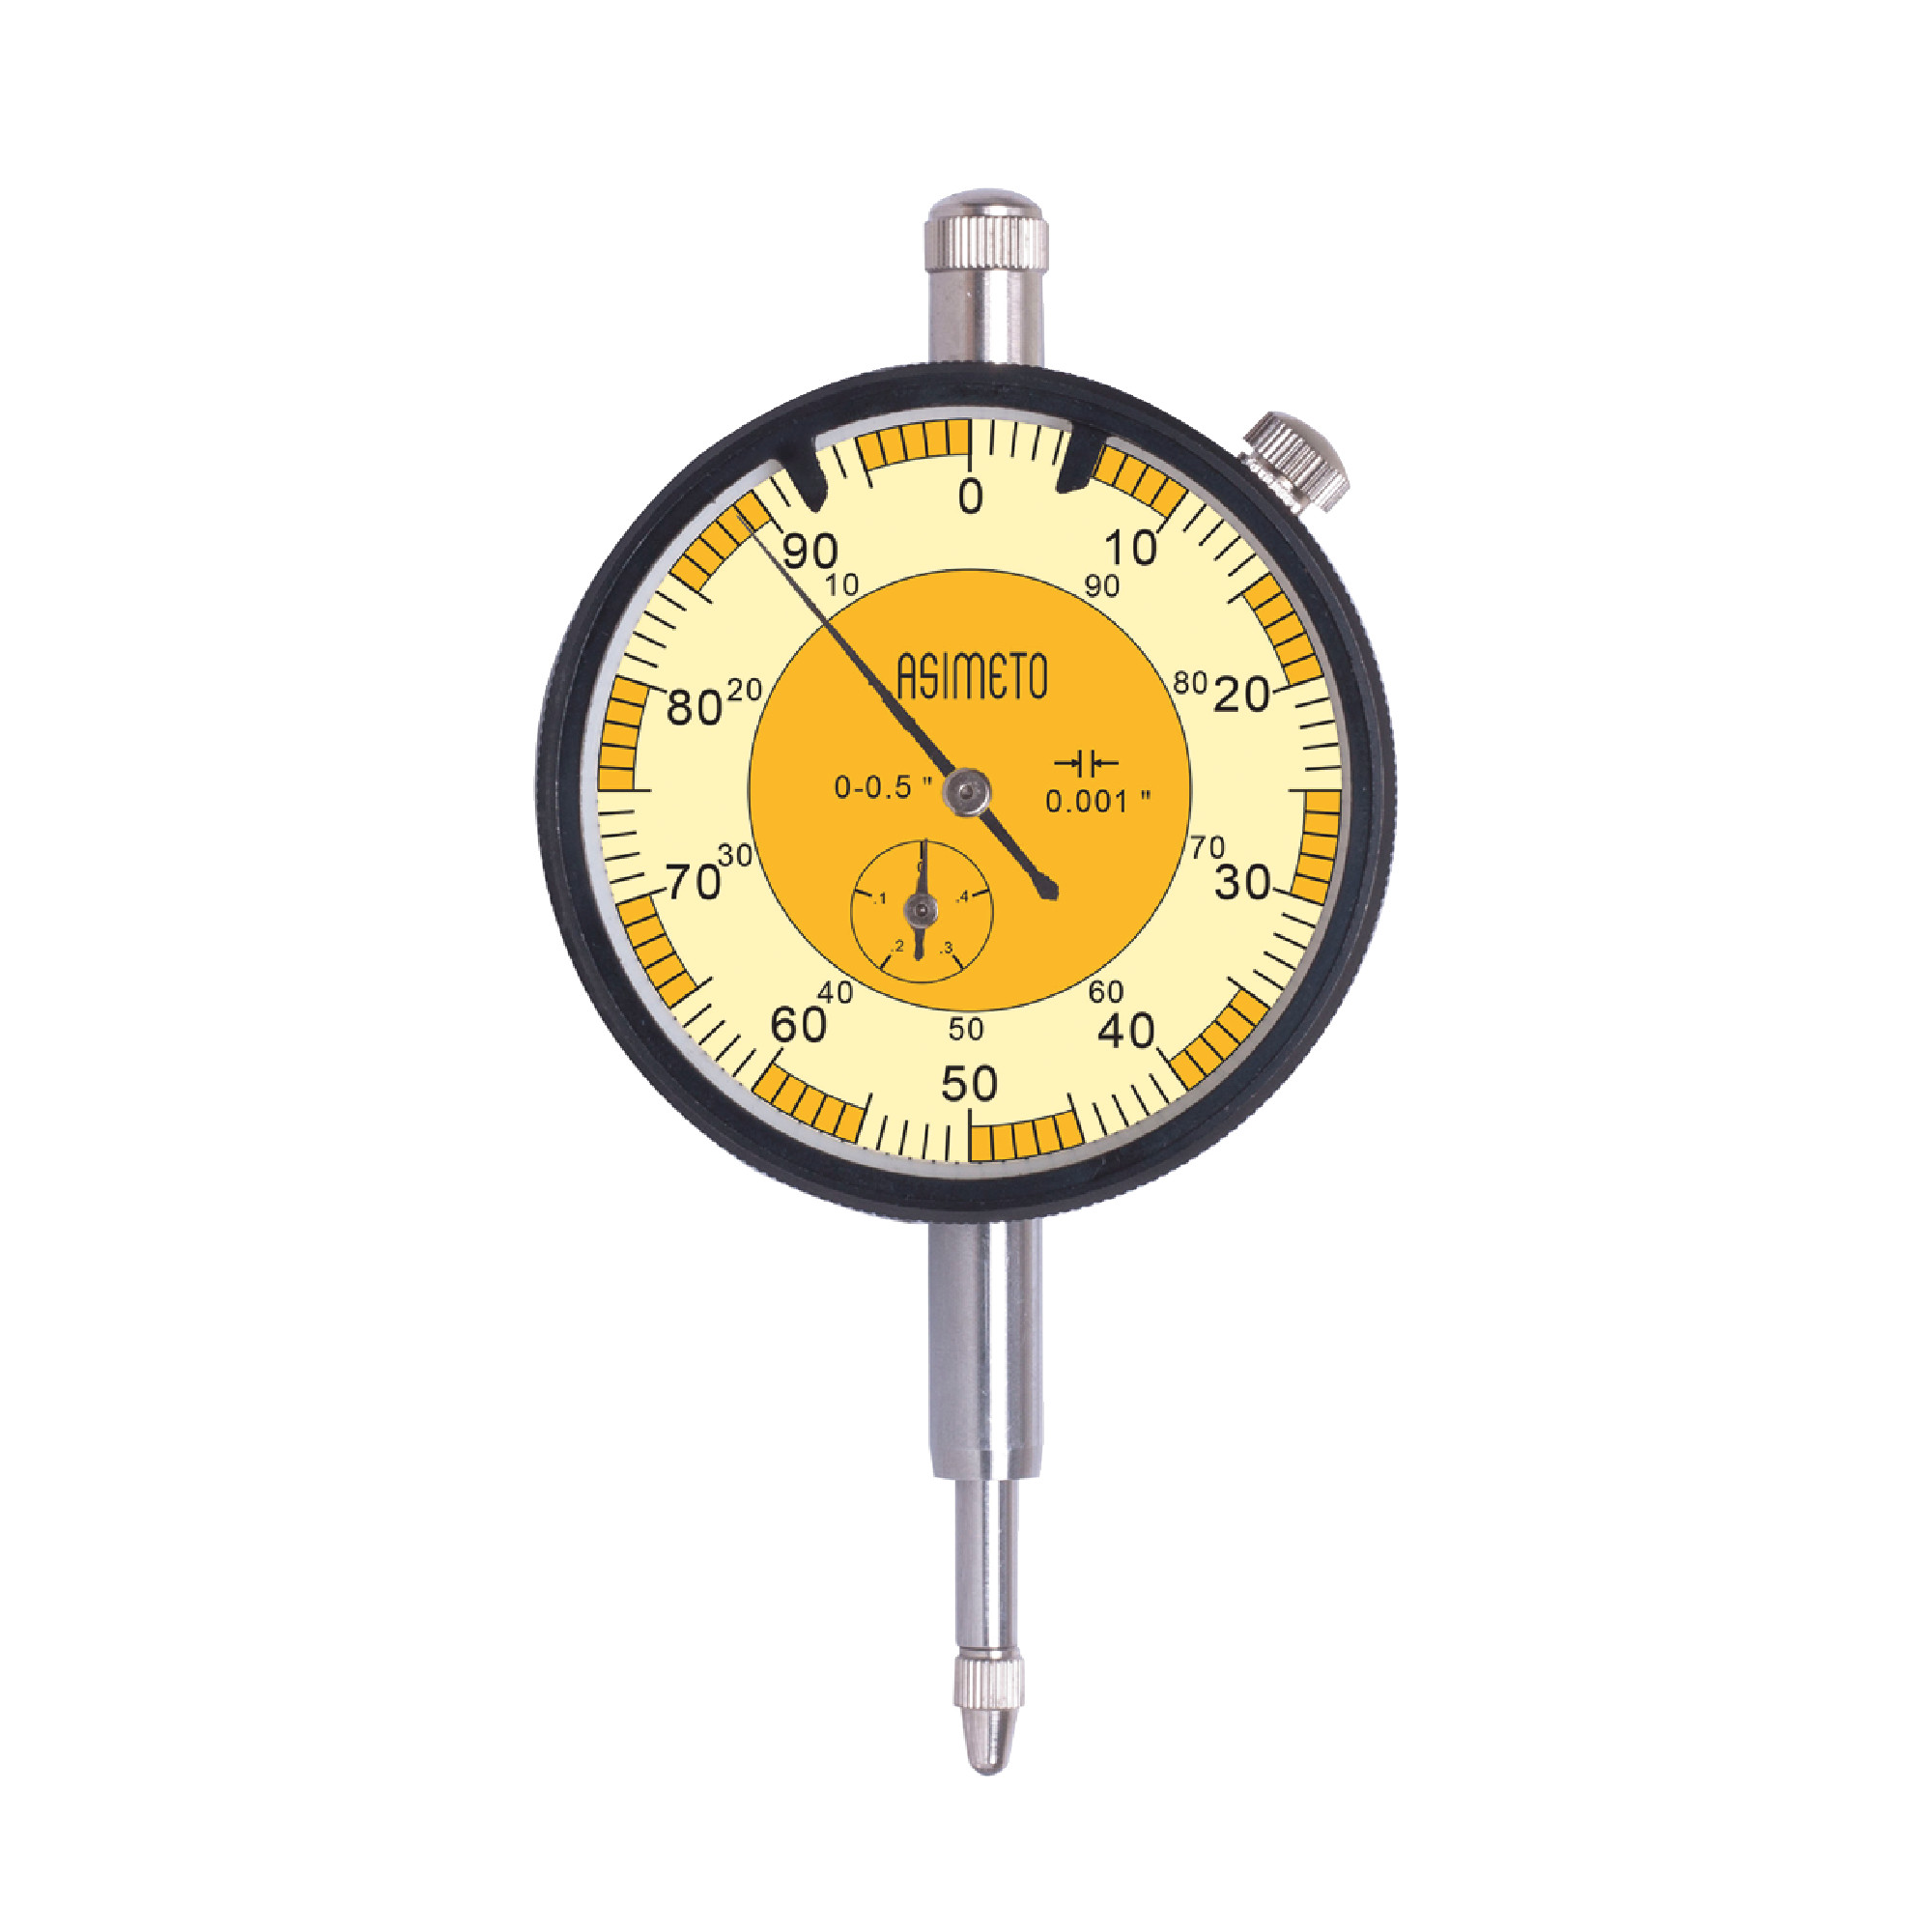 Precision AGD2 Jeweled Dial Indicator